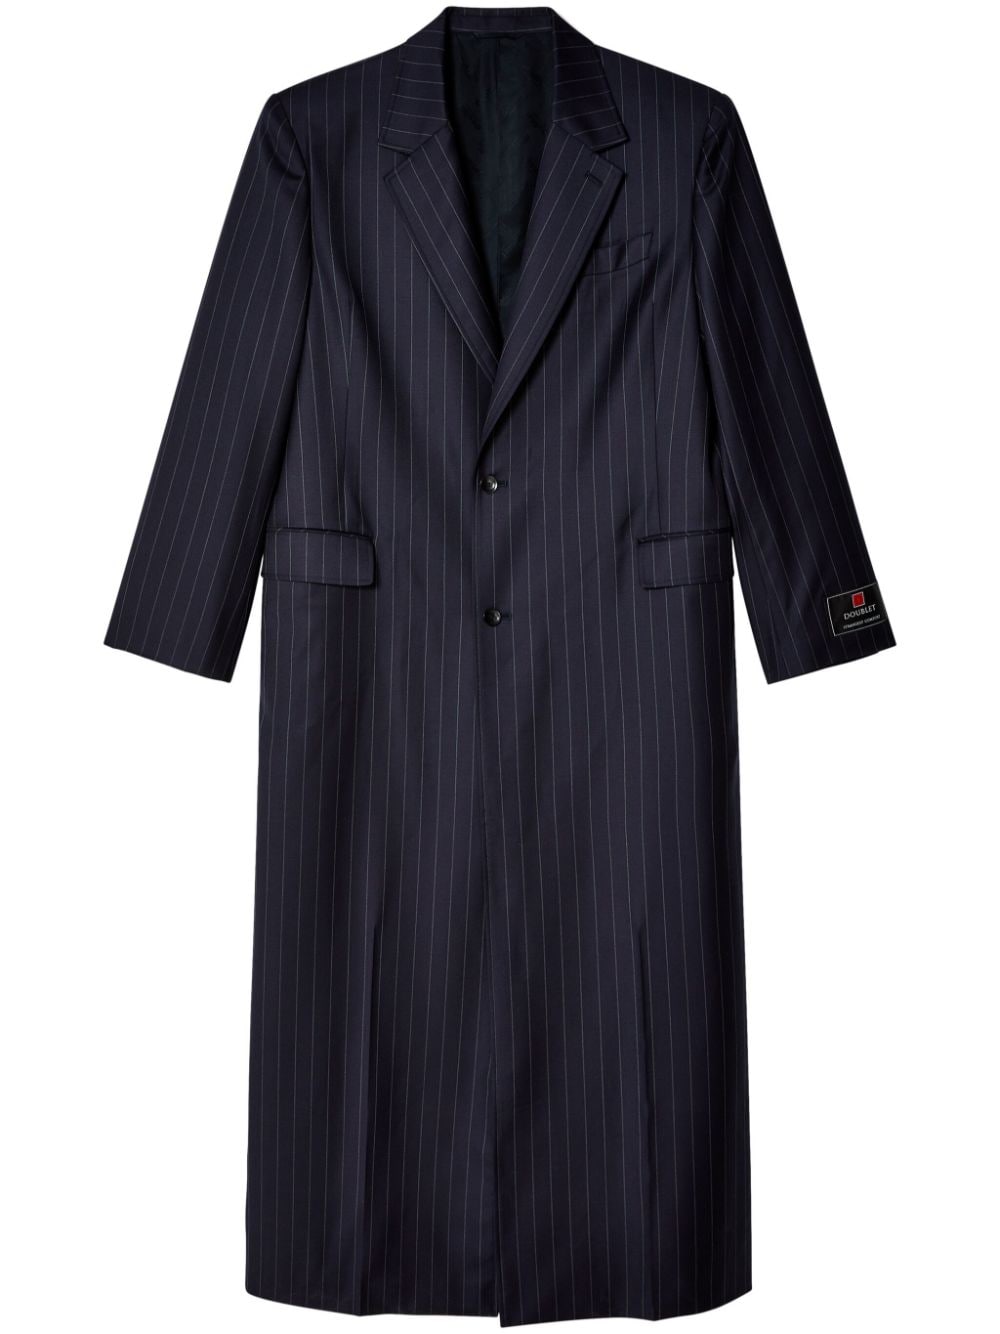 Doublet striped single-breasted maxi coat - Black von Doublet